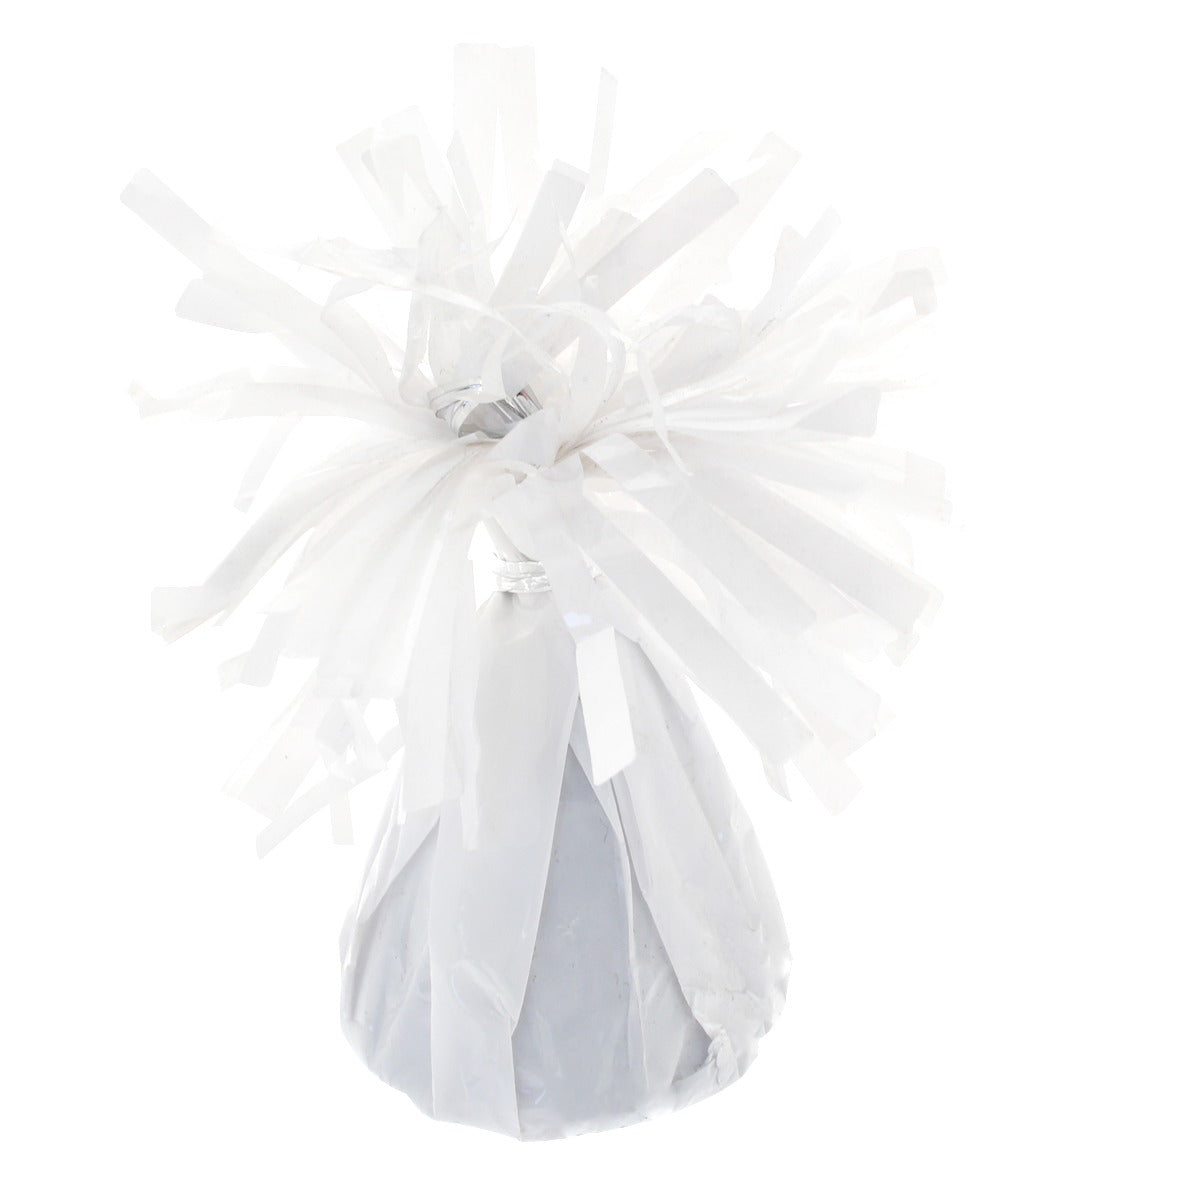 View White Foil Balloon Weight 12 pieces information